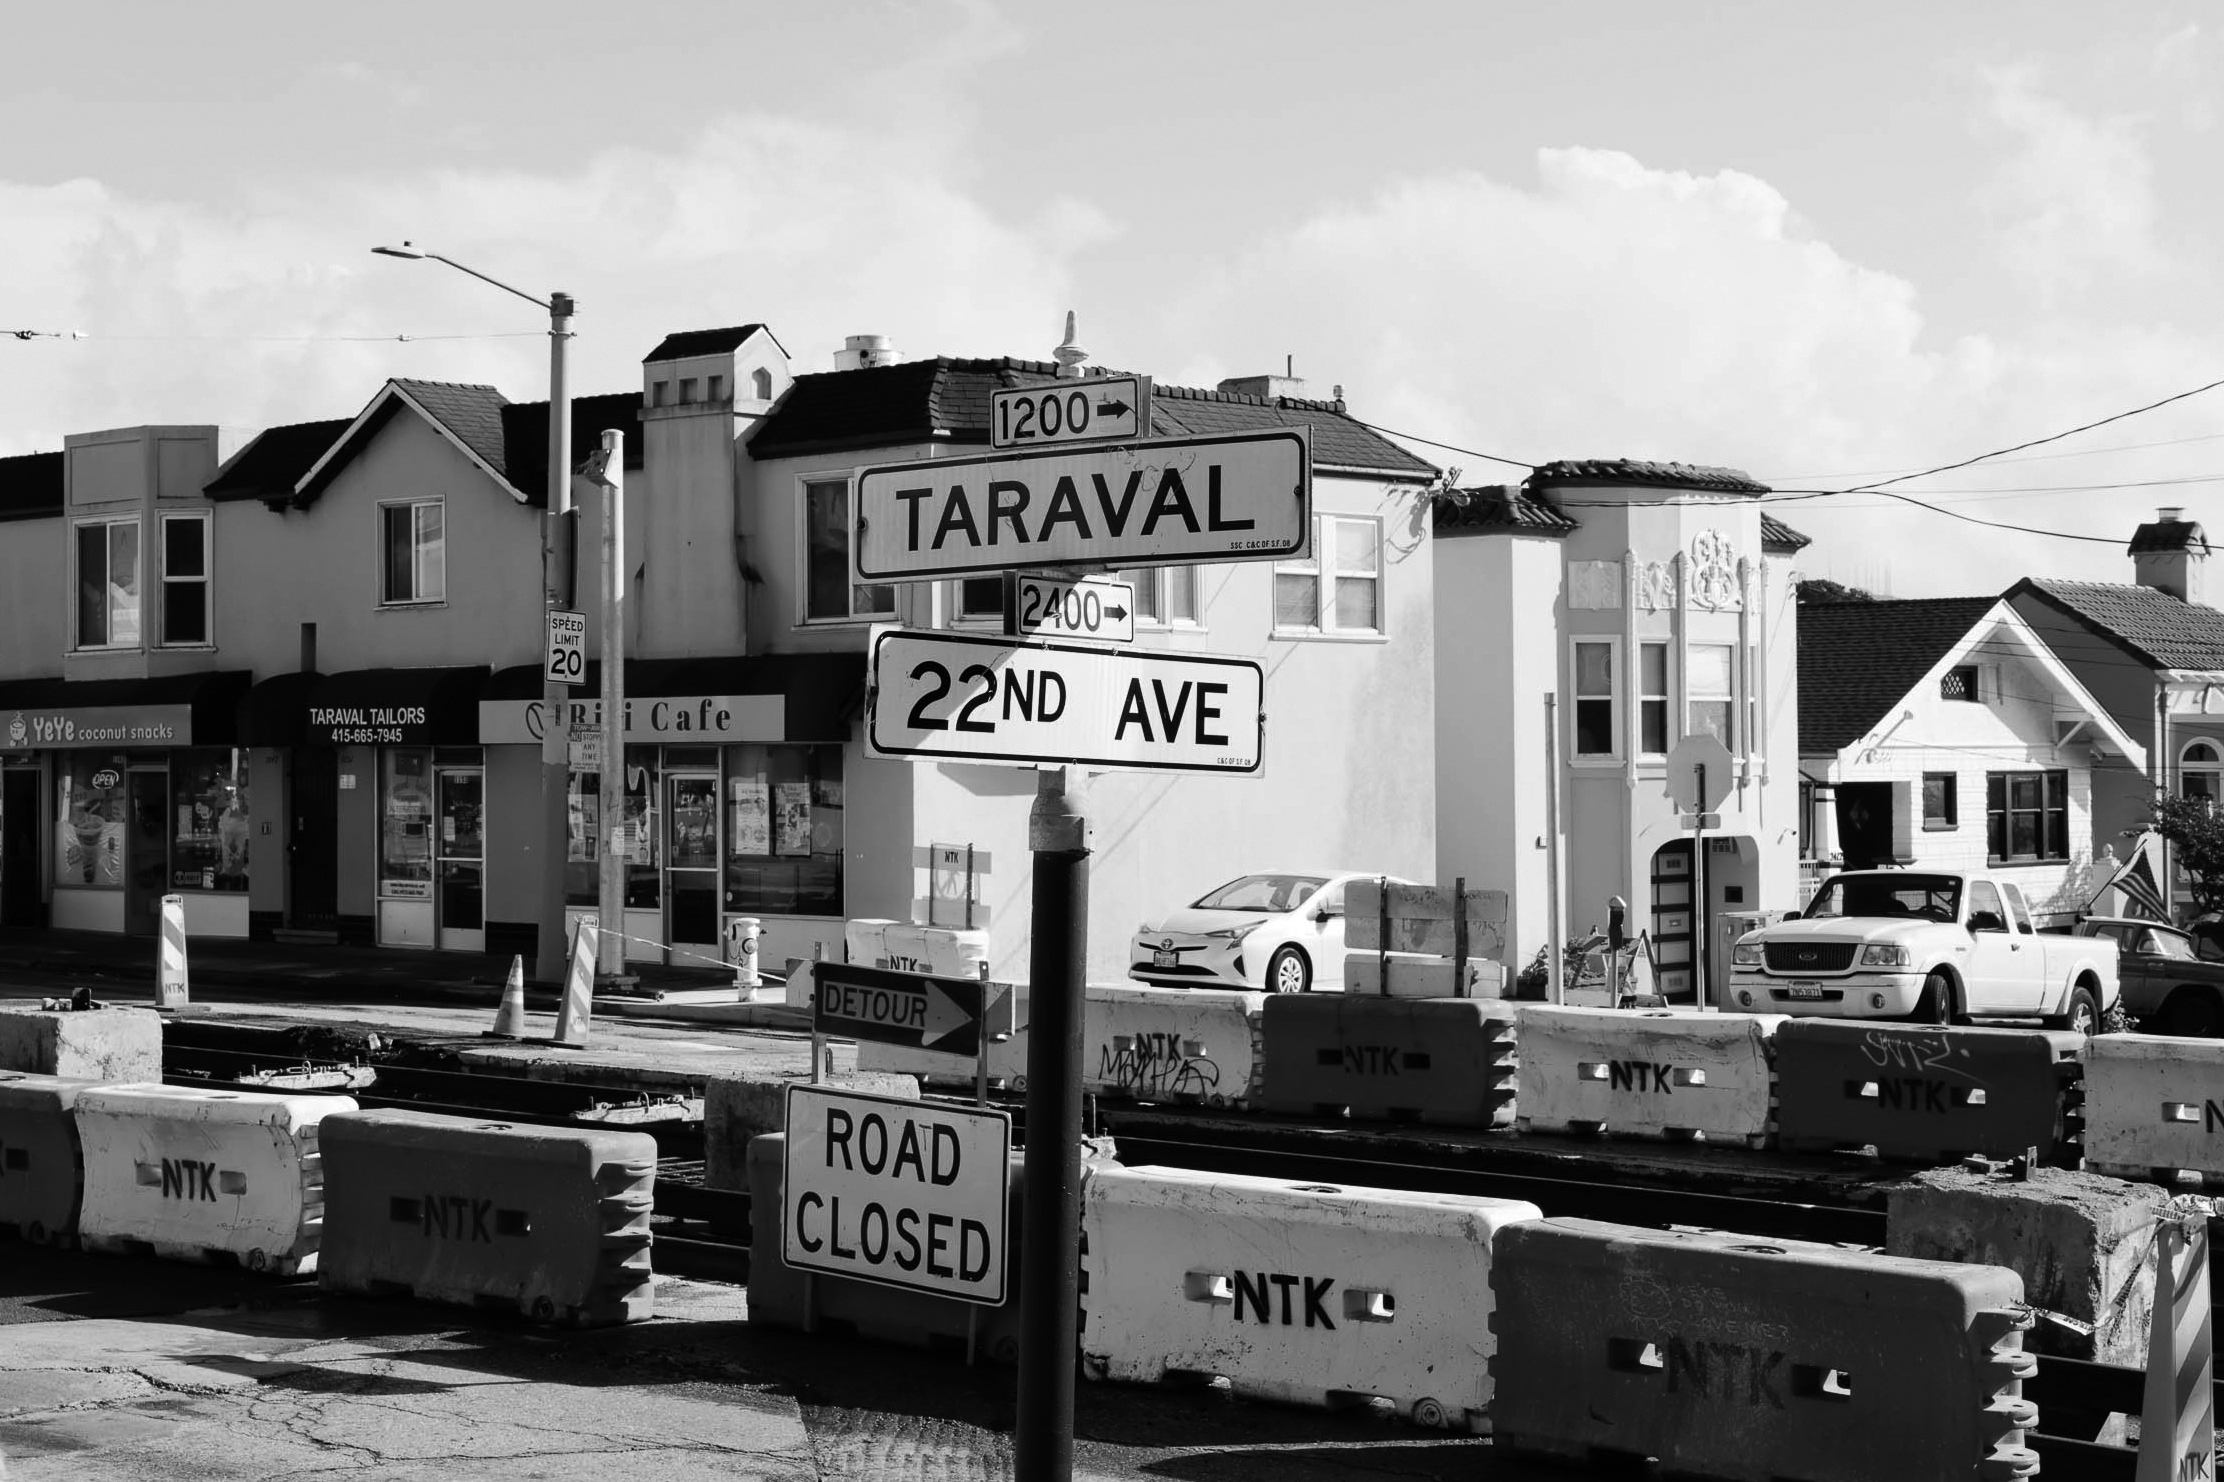 An urban street corner showing roadwork barriers with "ROAD CLOSED" signs, under a street sign for "TARAVAL" and "22ND AVE."